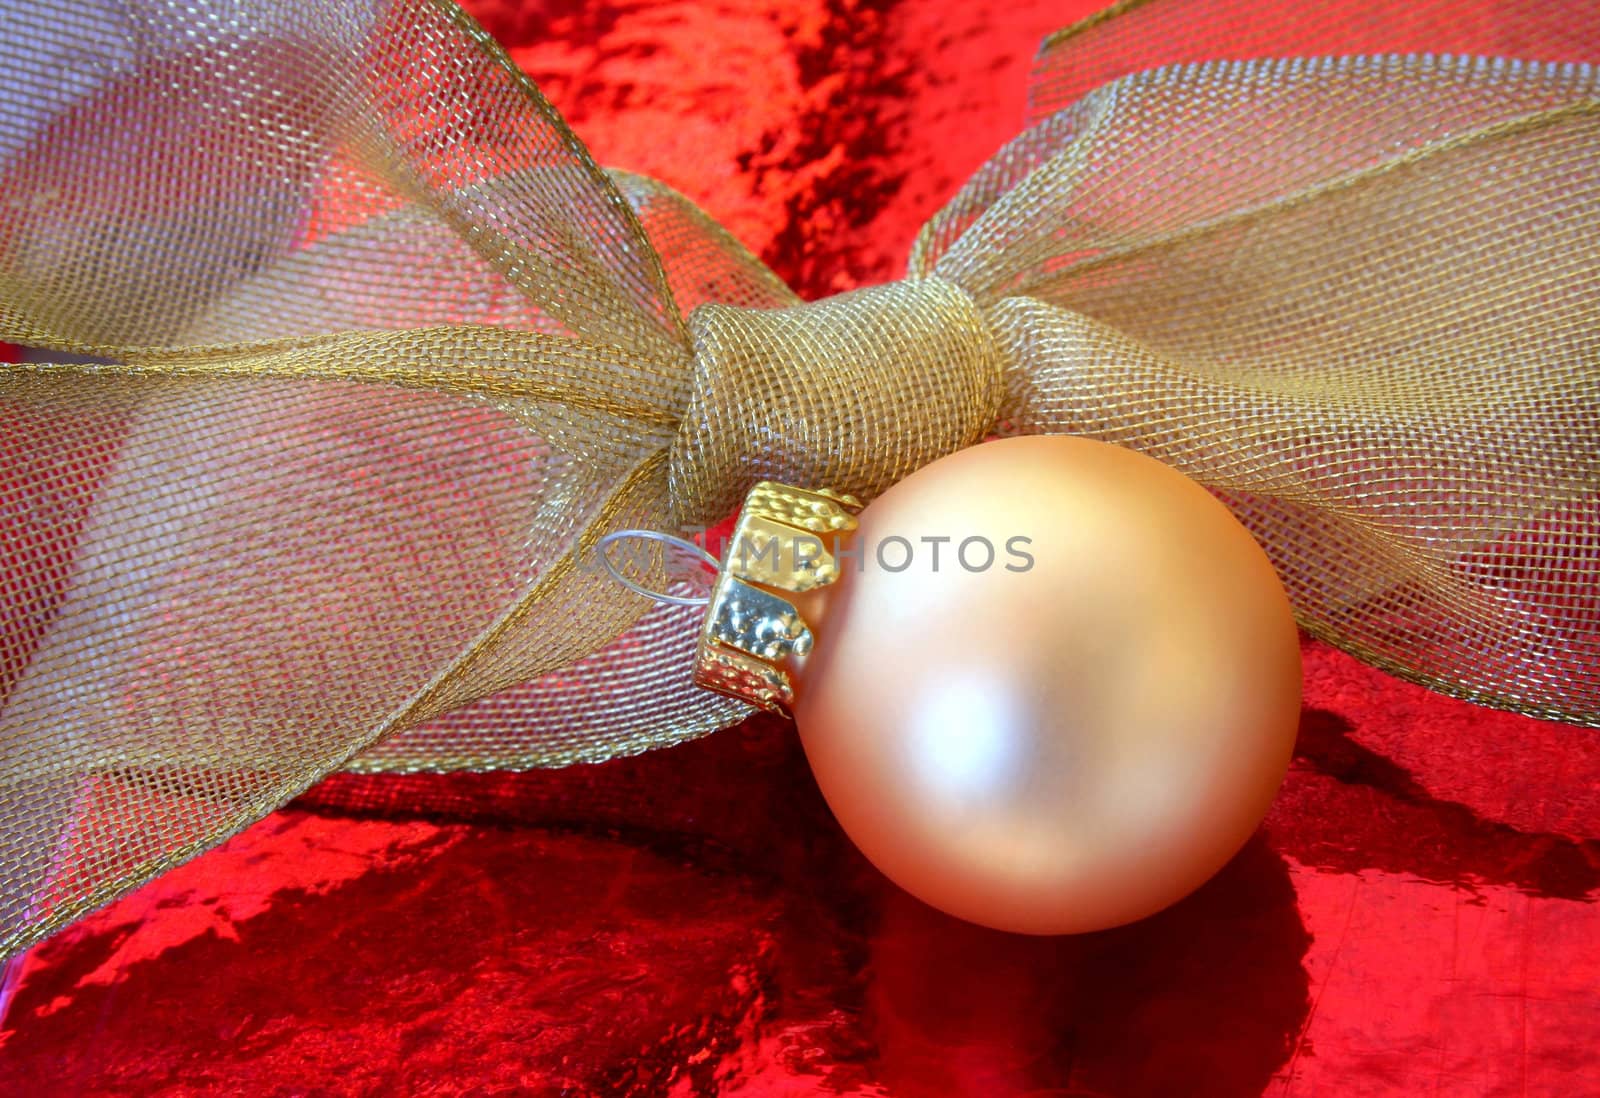 A gold Christmas ornament and gold bow on a red metallic background.